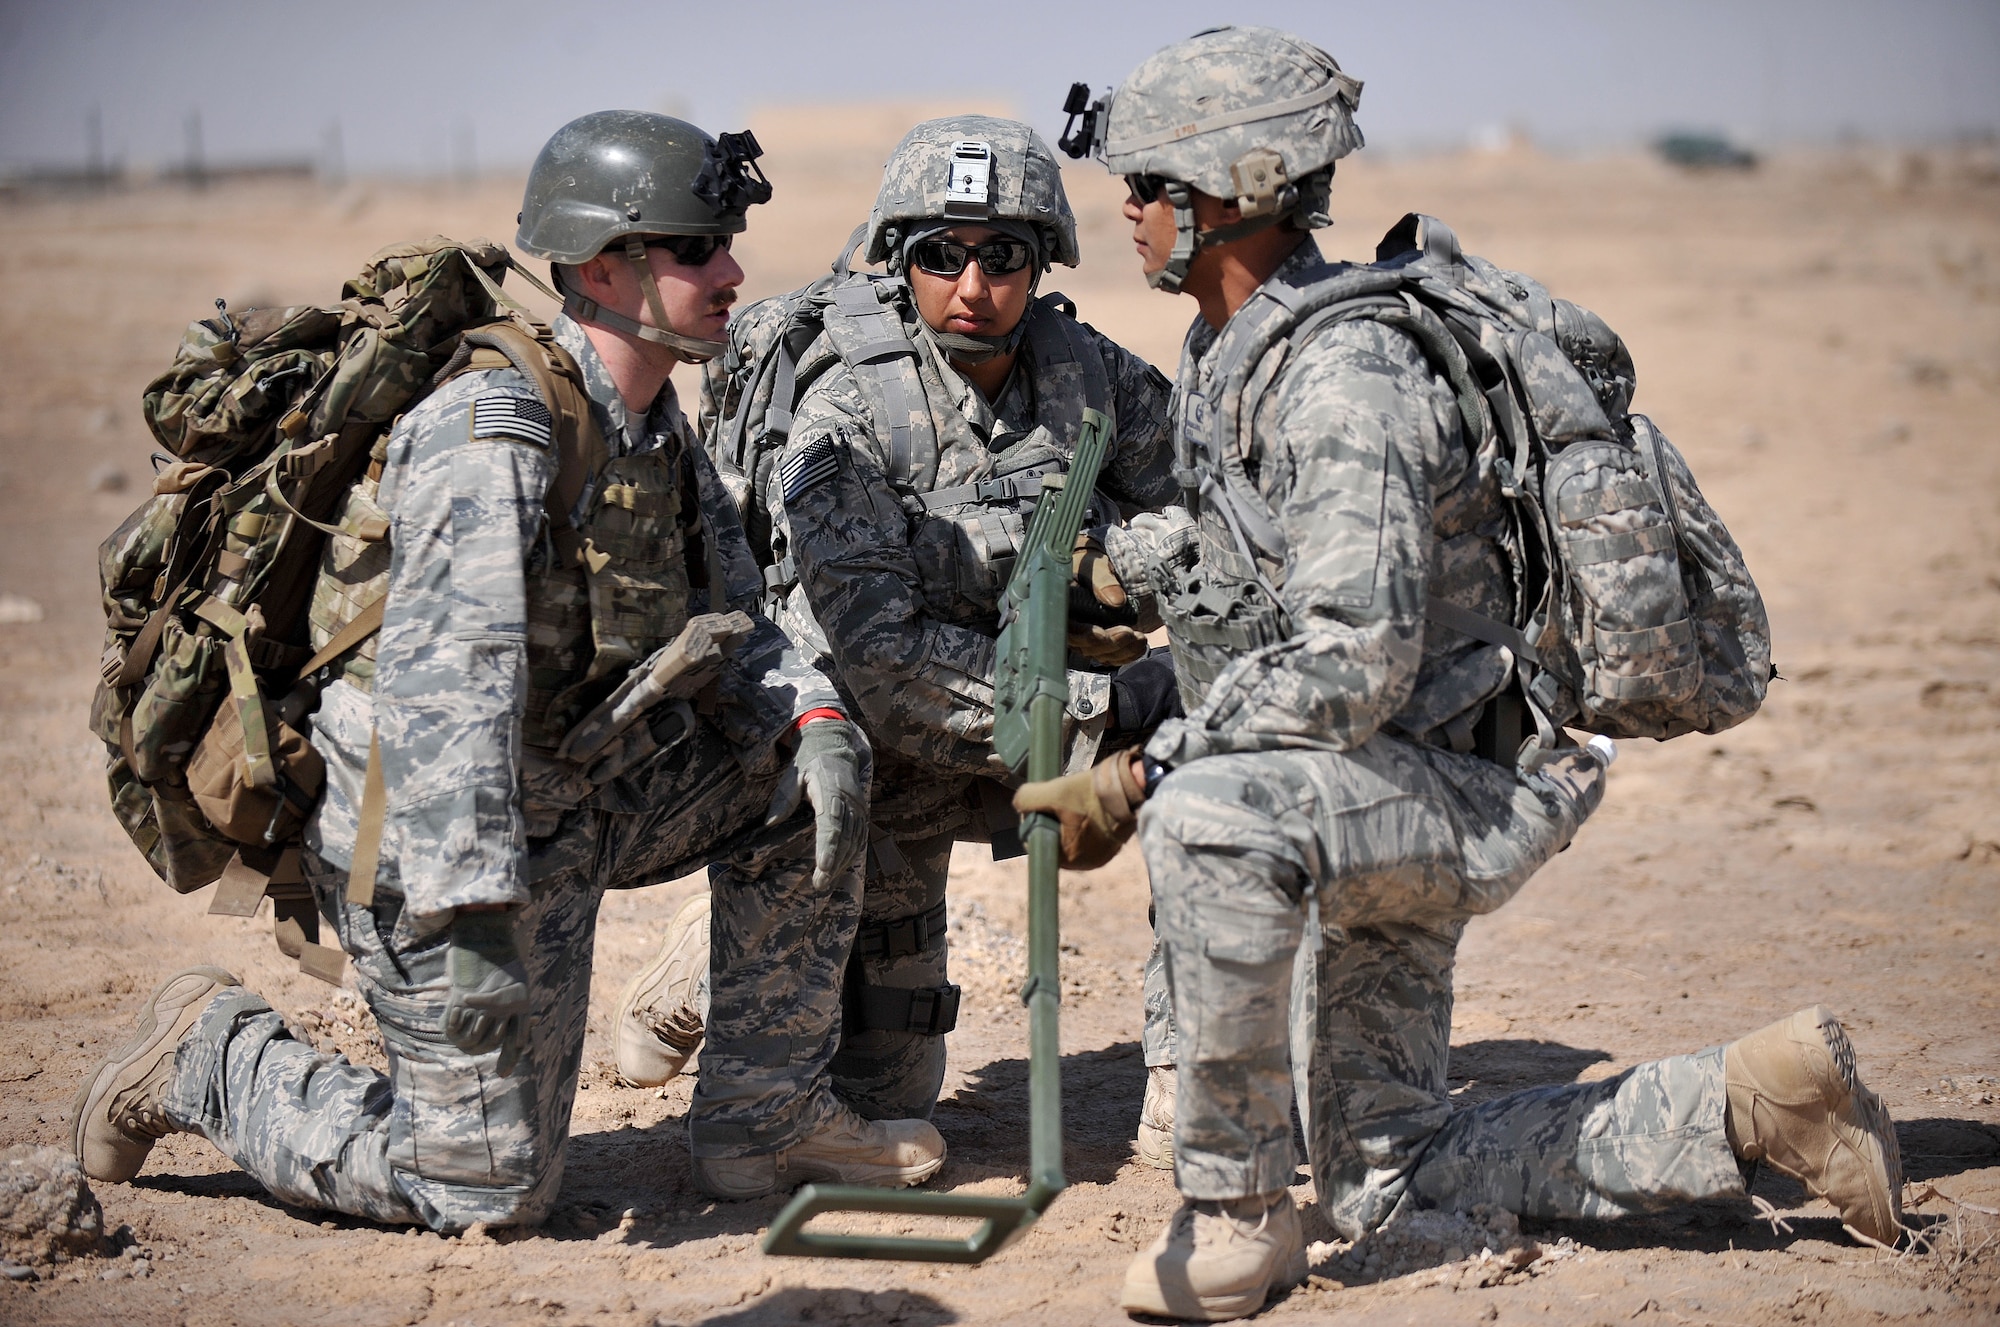 The 407th Expeditionary Operations Support Squadron explosive ordnance disposal team talks together about the scenario at hand during a training exercise March 3, 2010, at Ali Air Base, Iraq. (U.S. Air Force photo by Senior Airman Andrew Lee/Released) 